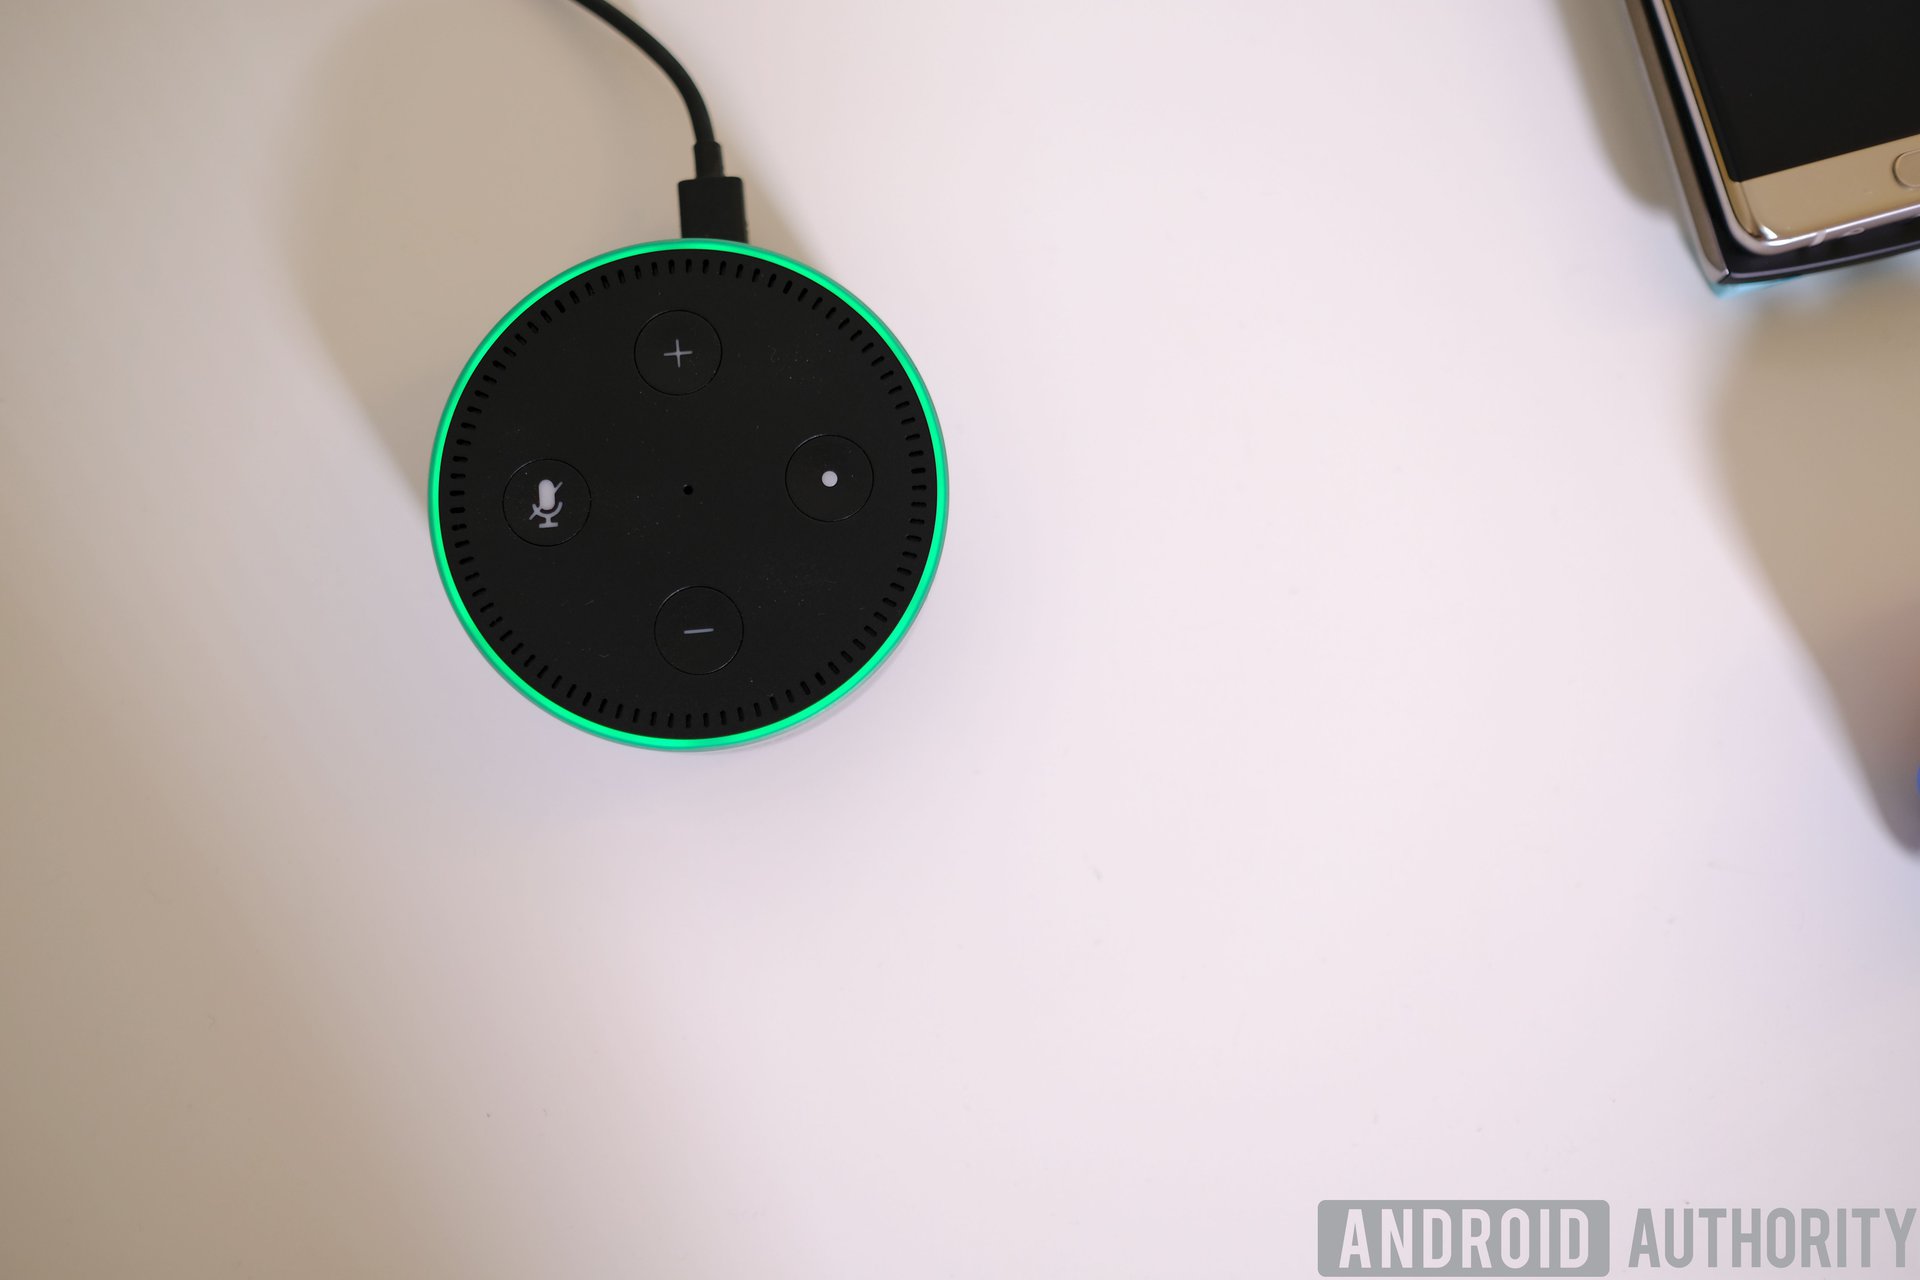 Amazon Echo Dot turned on green light from top